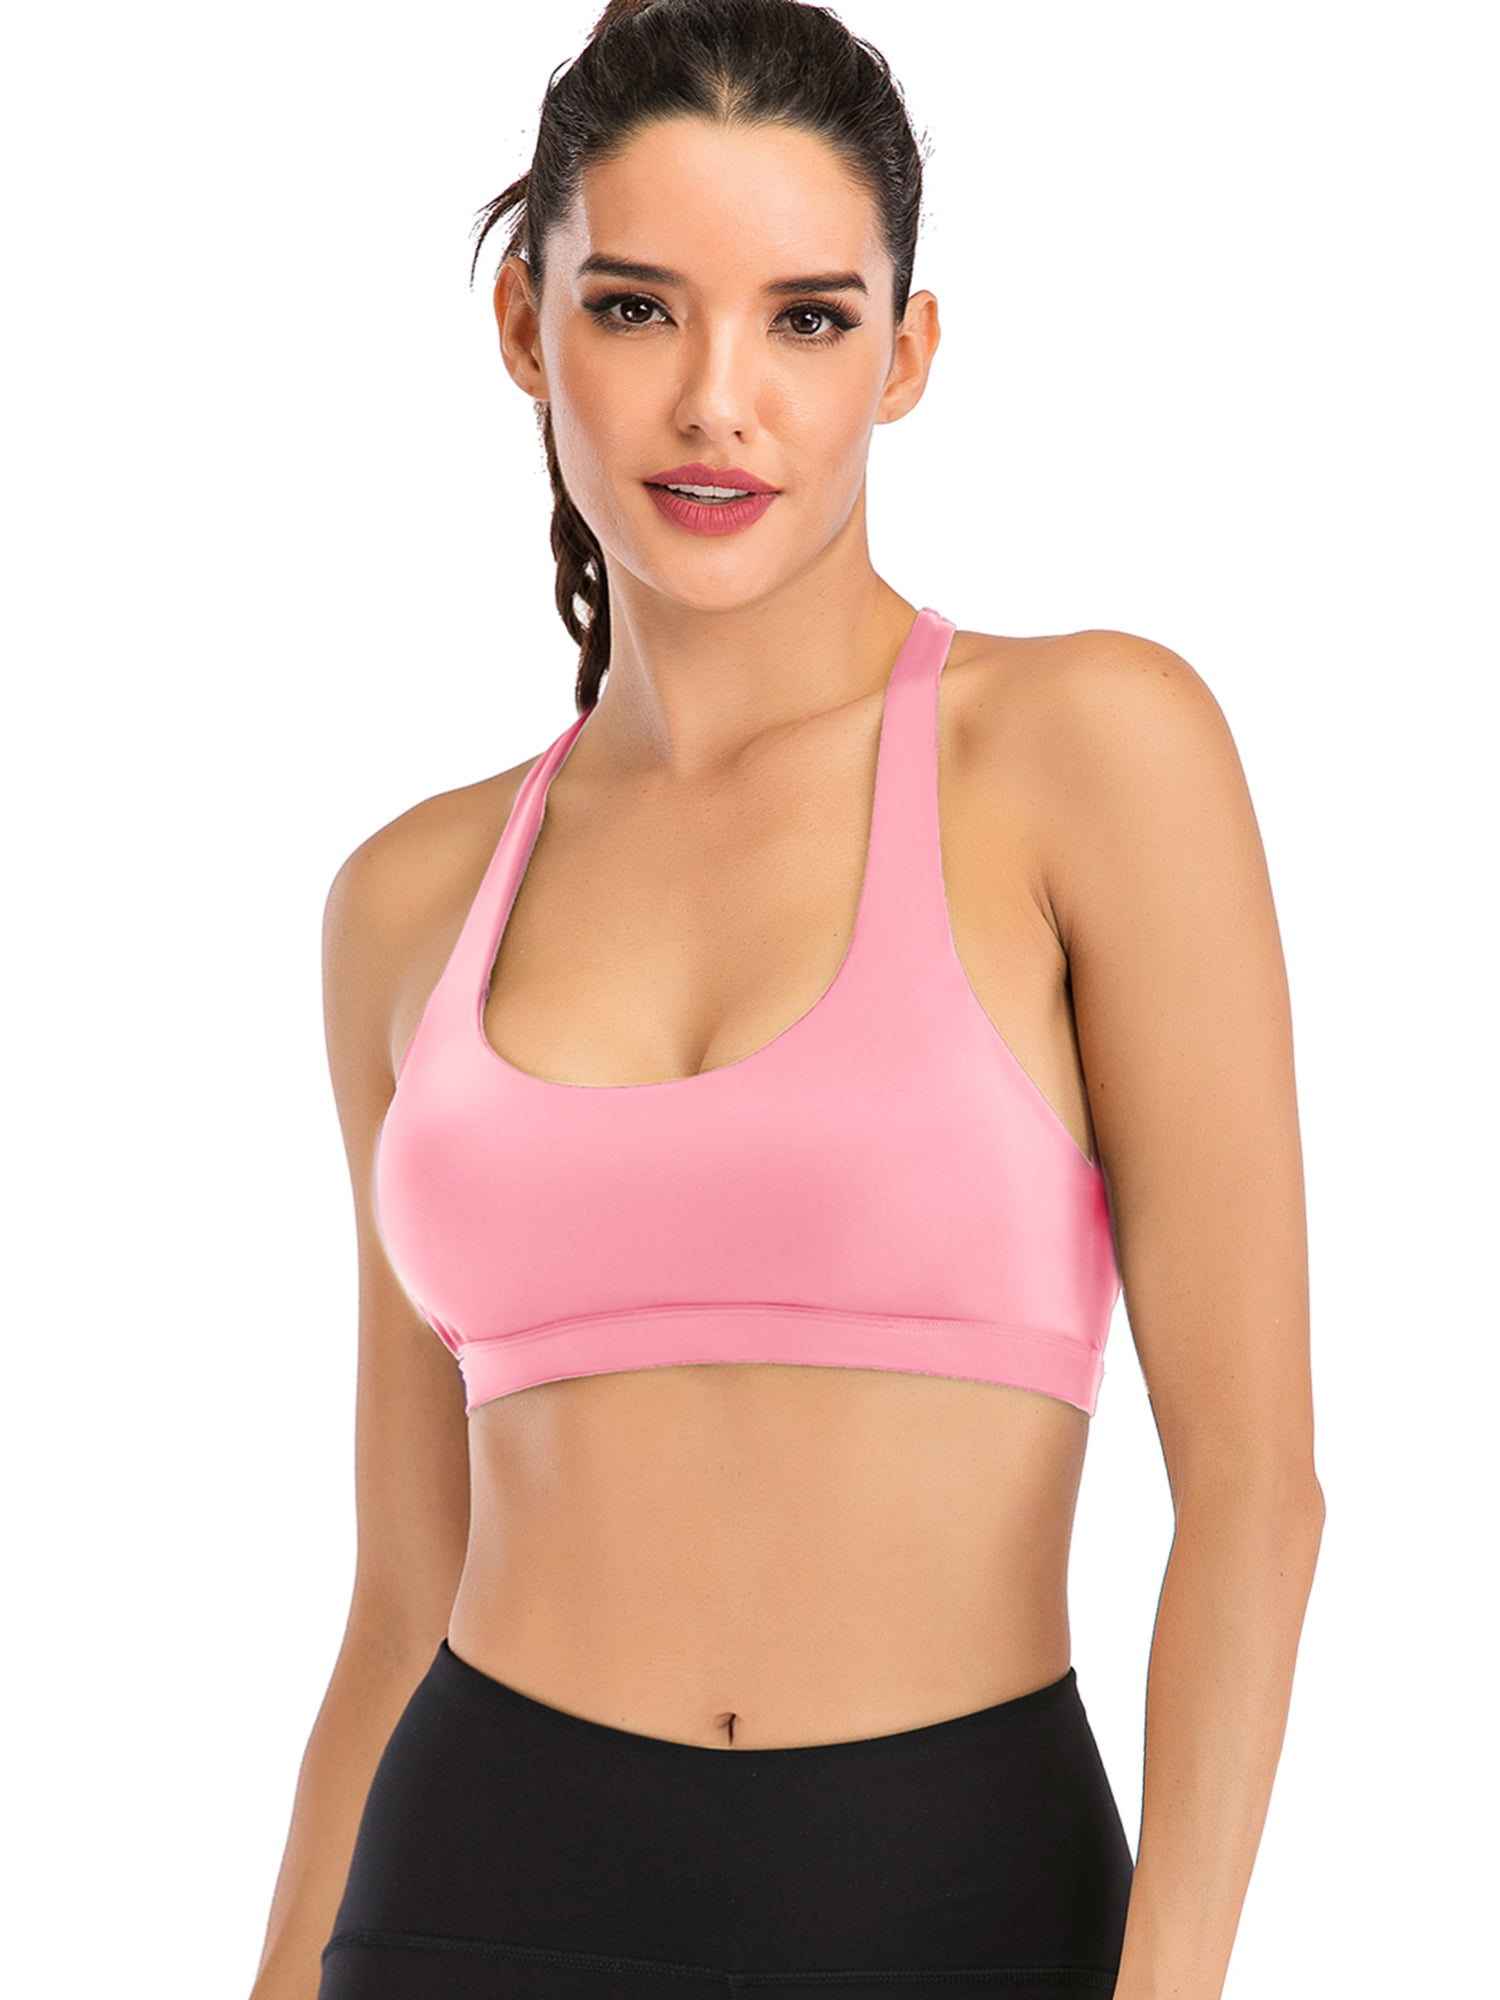 SAYFUT Women's Sports Bra With Removable Padded, Push Up Sports Bra Tube  Bra Tops Fitness Workout Running Shirts Yoga Bras Camisole Crop